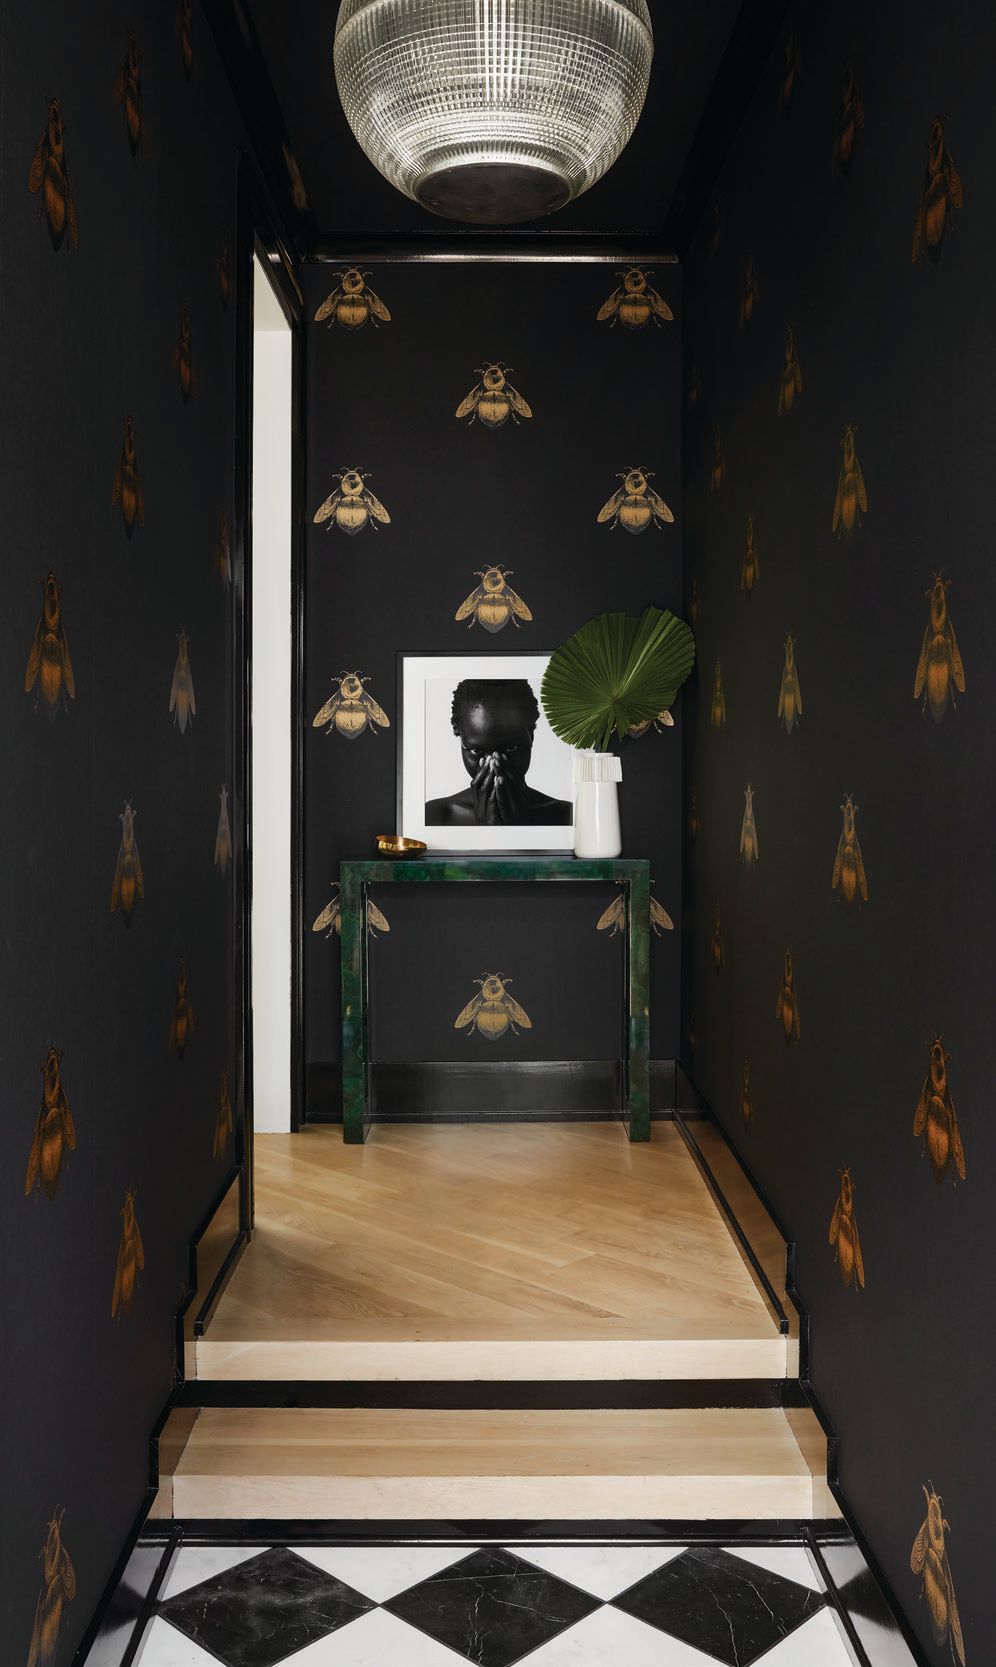 Showstopping Napoleon Bee wallpaper by Timorous Beasties, a striking portrait by David Allan Brandt and chic checkerboard flooring by Renaissance Tile & Bath add up to a wow-worthy entry. PHOTOGRAPHED BY DUSTIN HALLECK